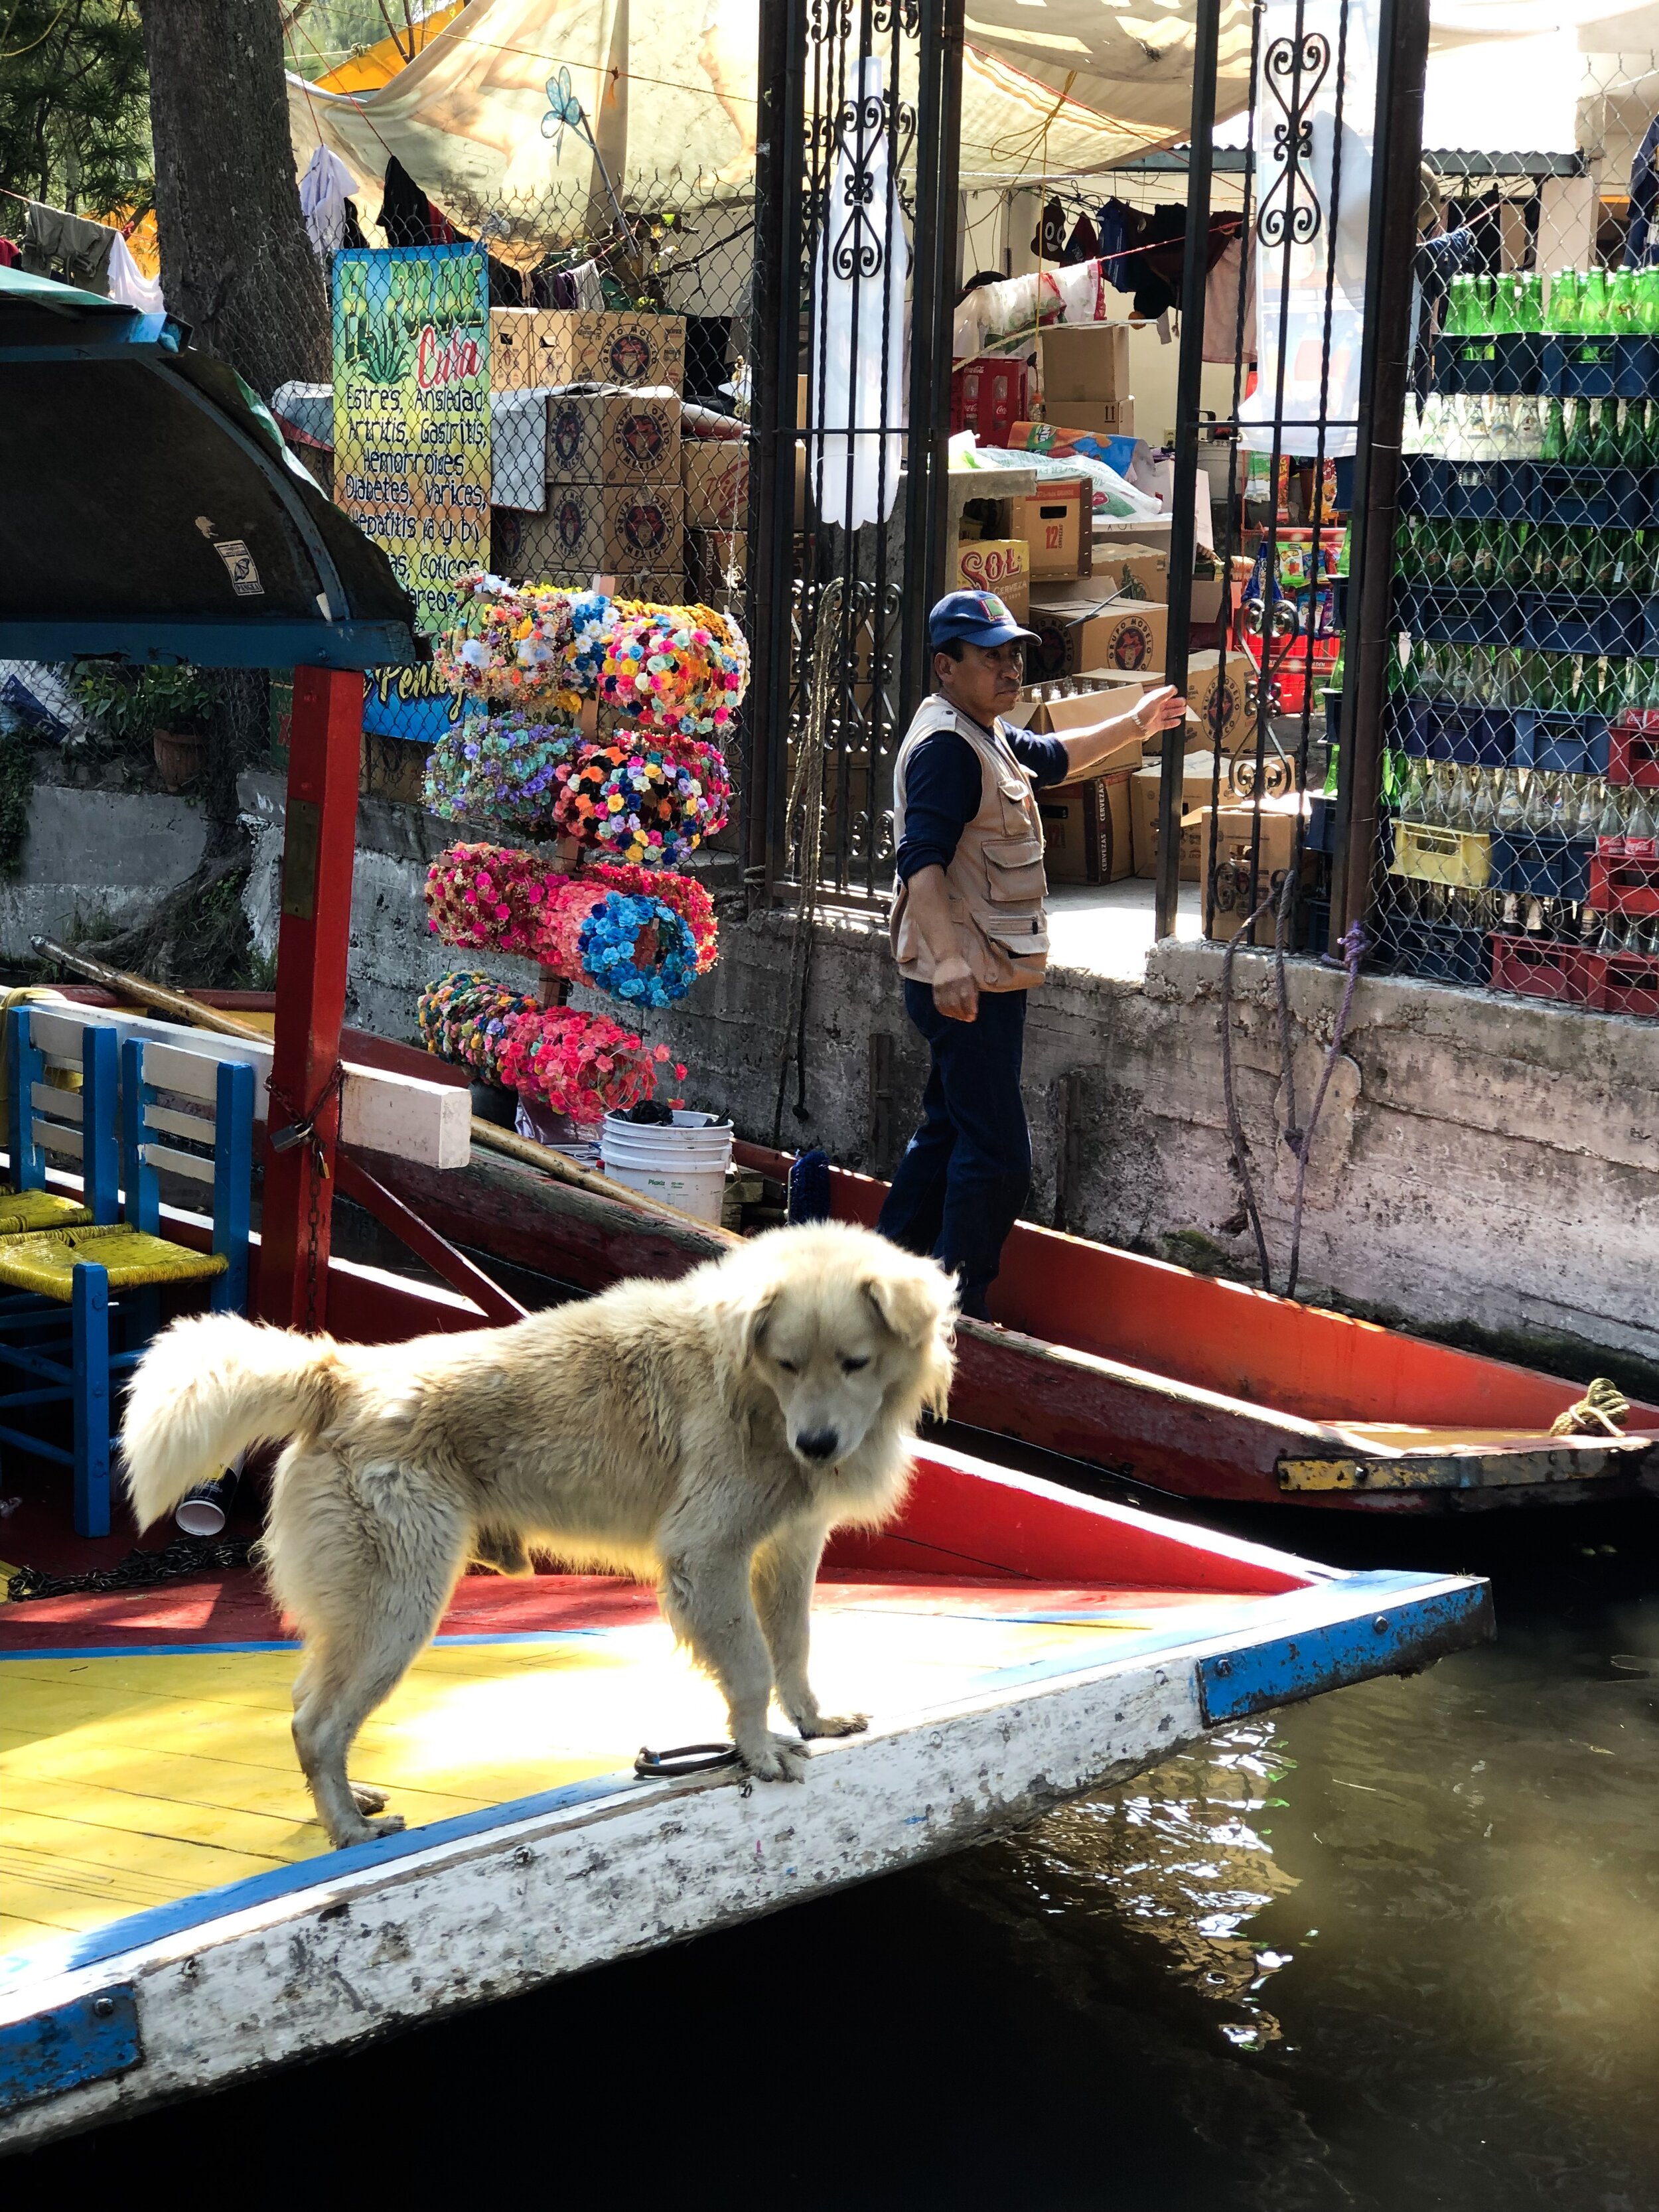 This perro hopped from boat to boat in search of food and affection.